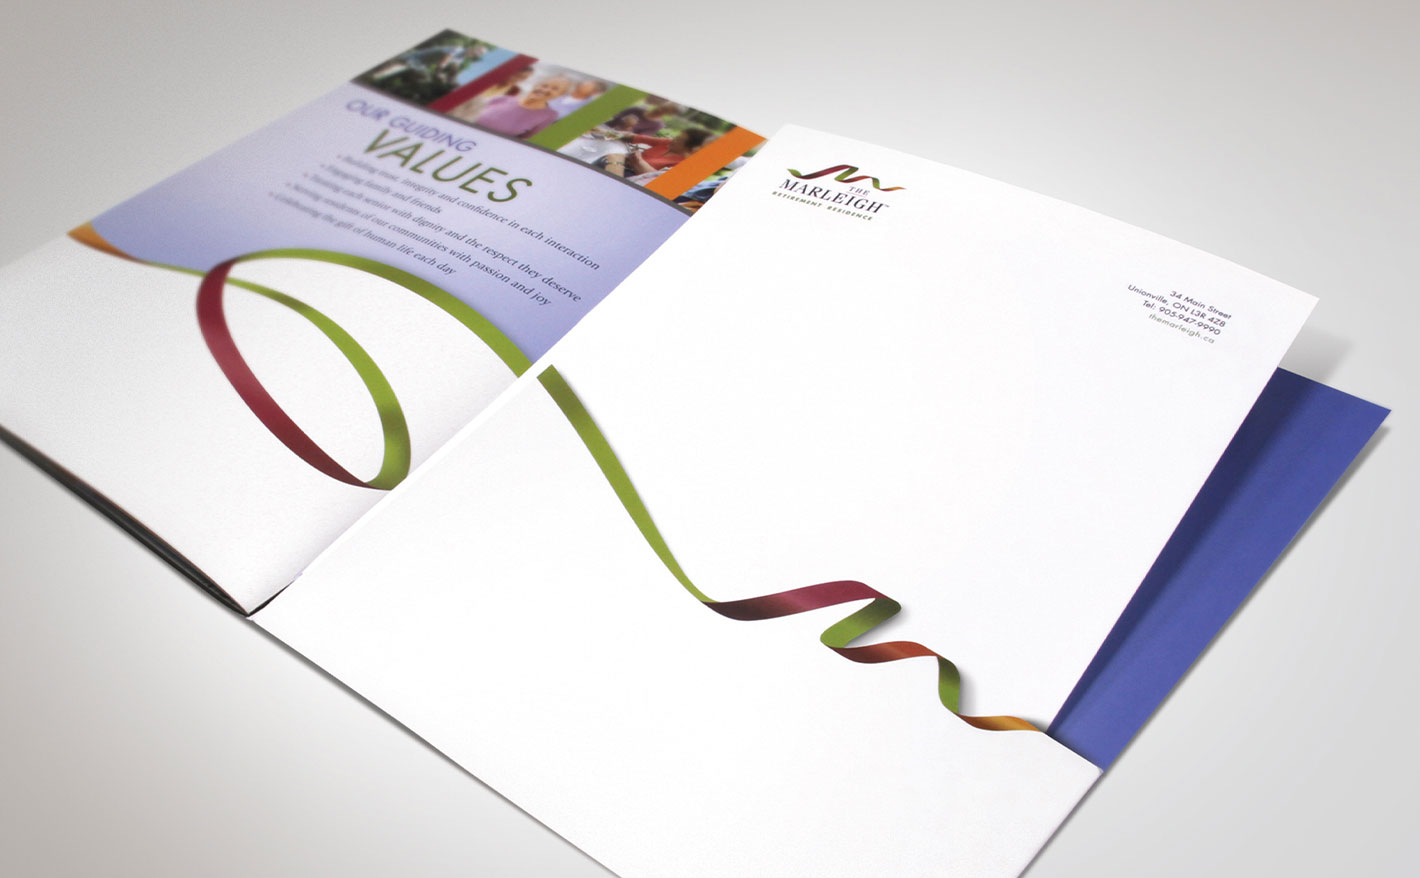 The Marleigh pocket folder and letterhead laid out on a table